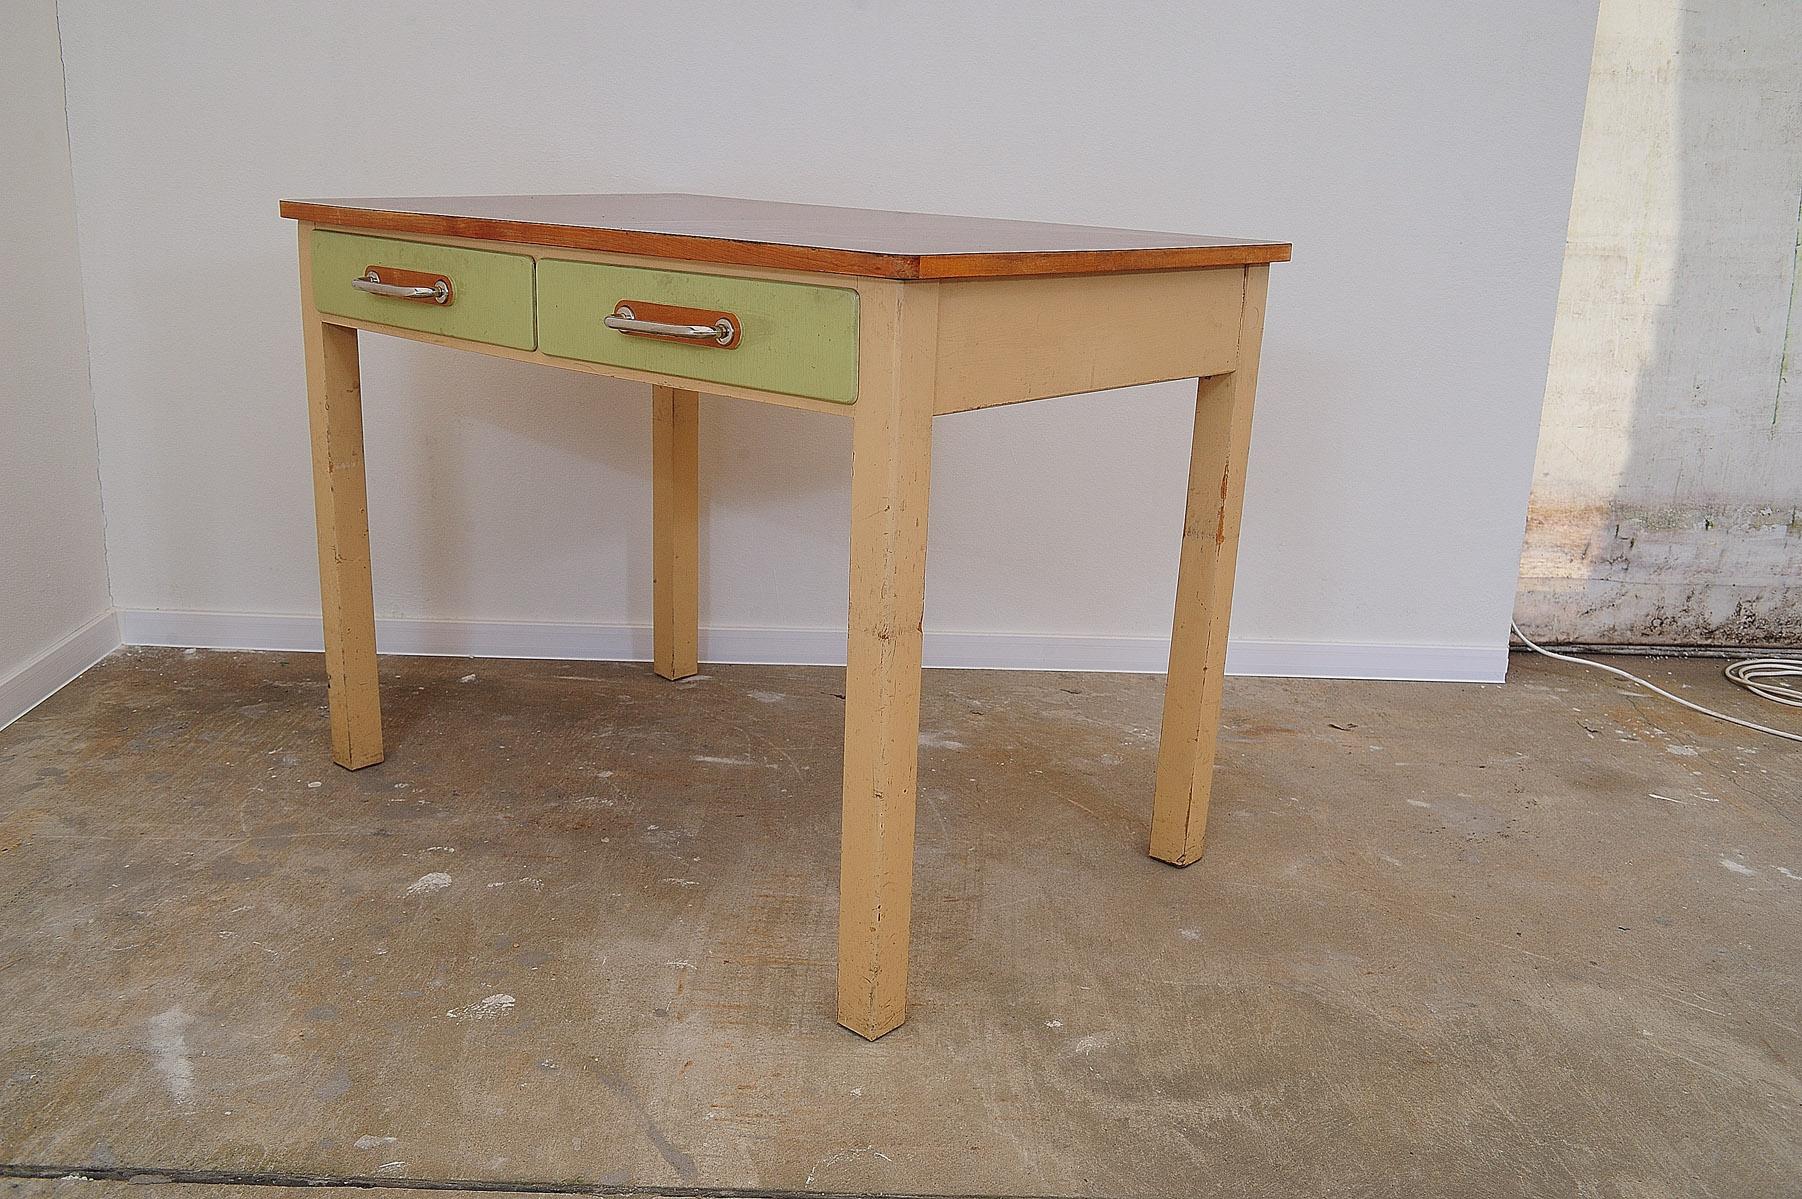 Mid century kitchen table with one drawer with a chrome handle as an interesting design element.

It was made in the former Czechoslovakia in the 1950´s. The table is made of wood and formica and painted in ivory and greenish color. Overall is in